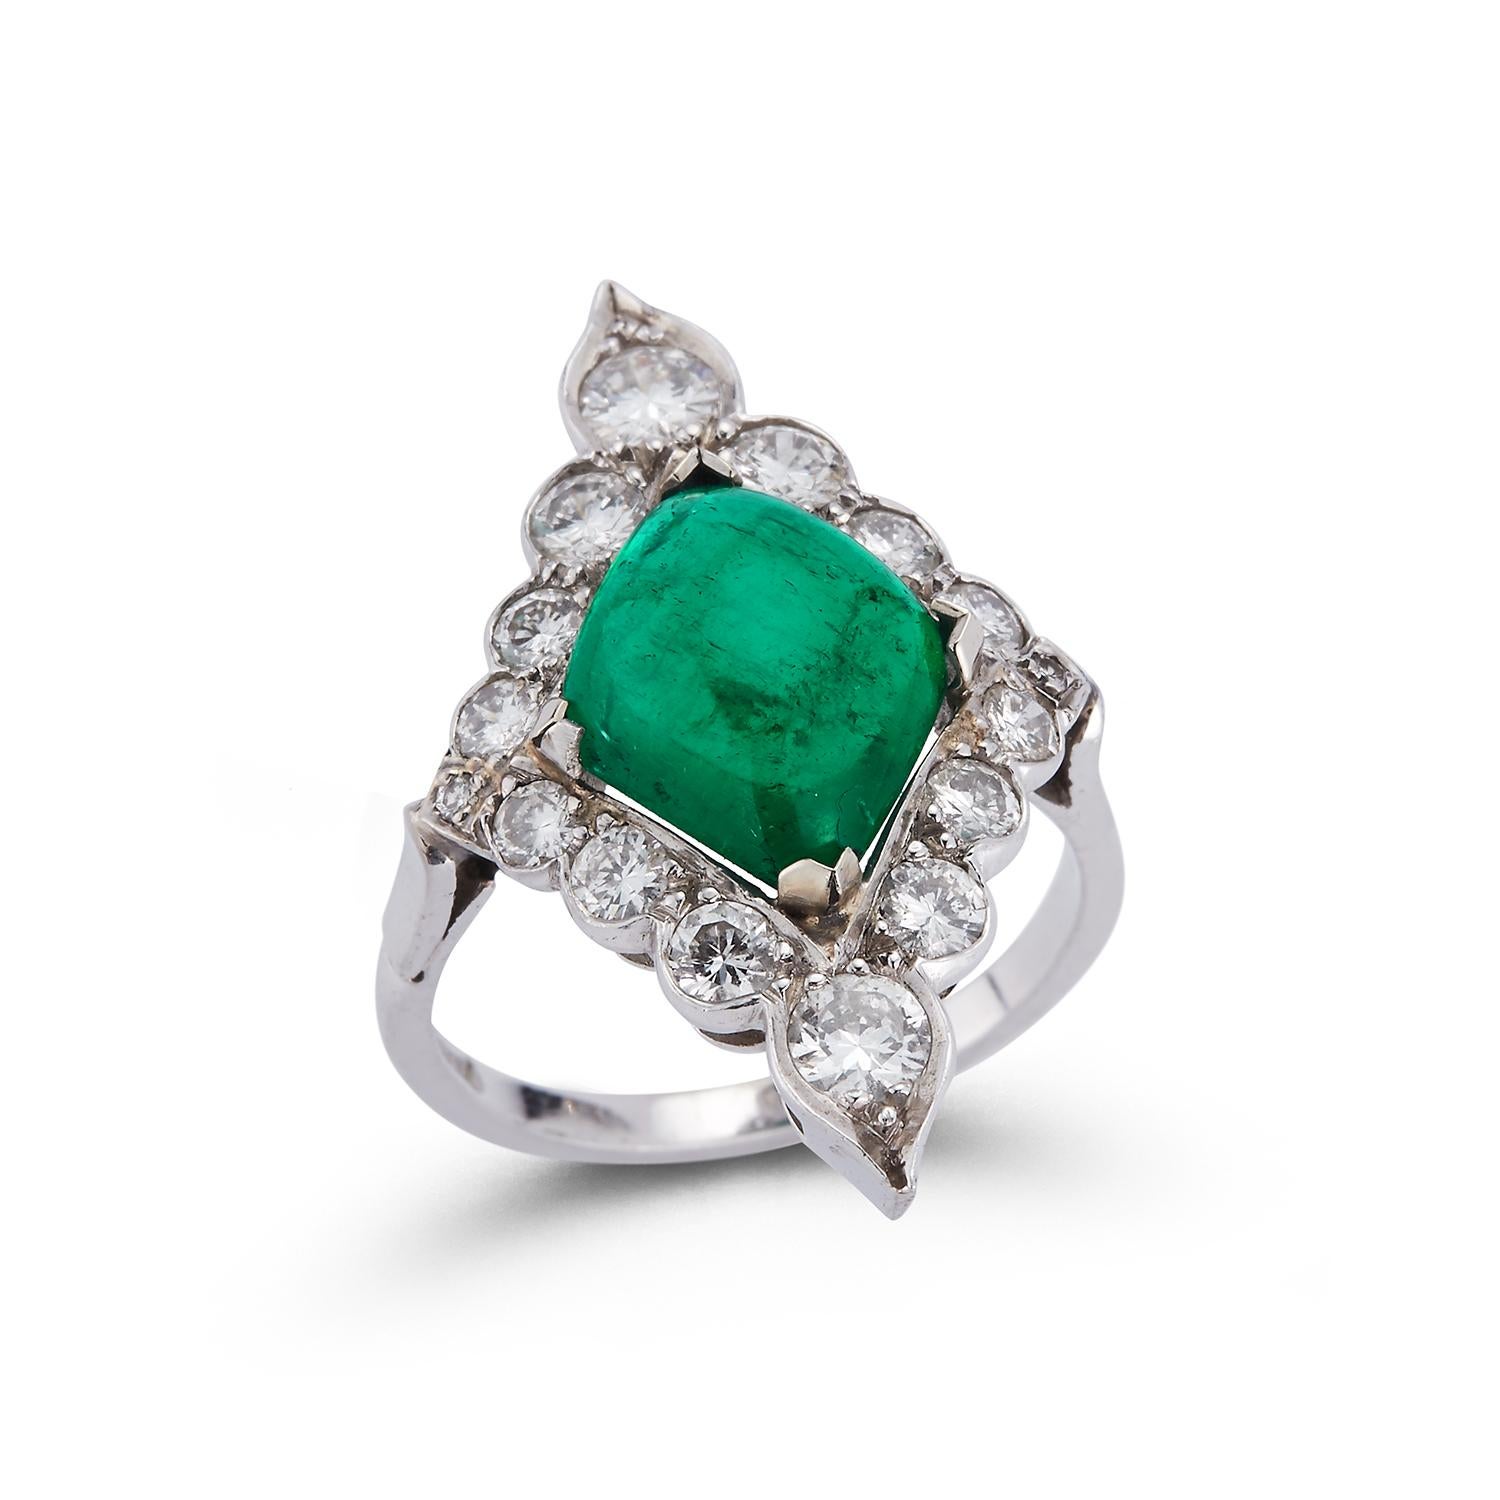 Certified Cabochon Emerald & Diamond Cocktail Navette Ring
Approximate Emerald Weight: 3.64 Cts certified by AGL laboratory as Colombian Origin
Approximate Diamond Weight: 1.40 Cts 
Ring Size: 4.75
Resizable to any size free of charge 
Gold Type: